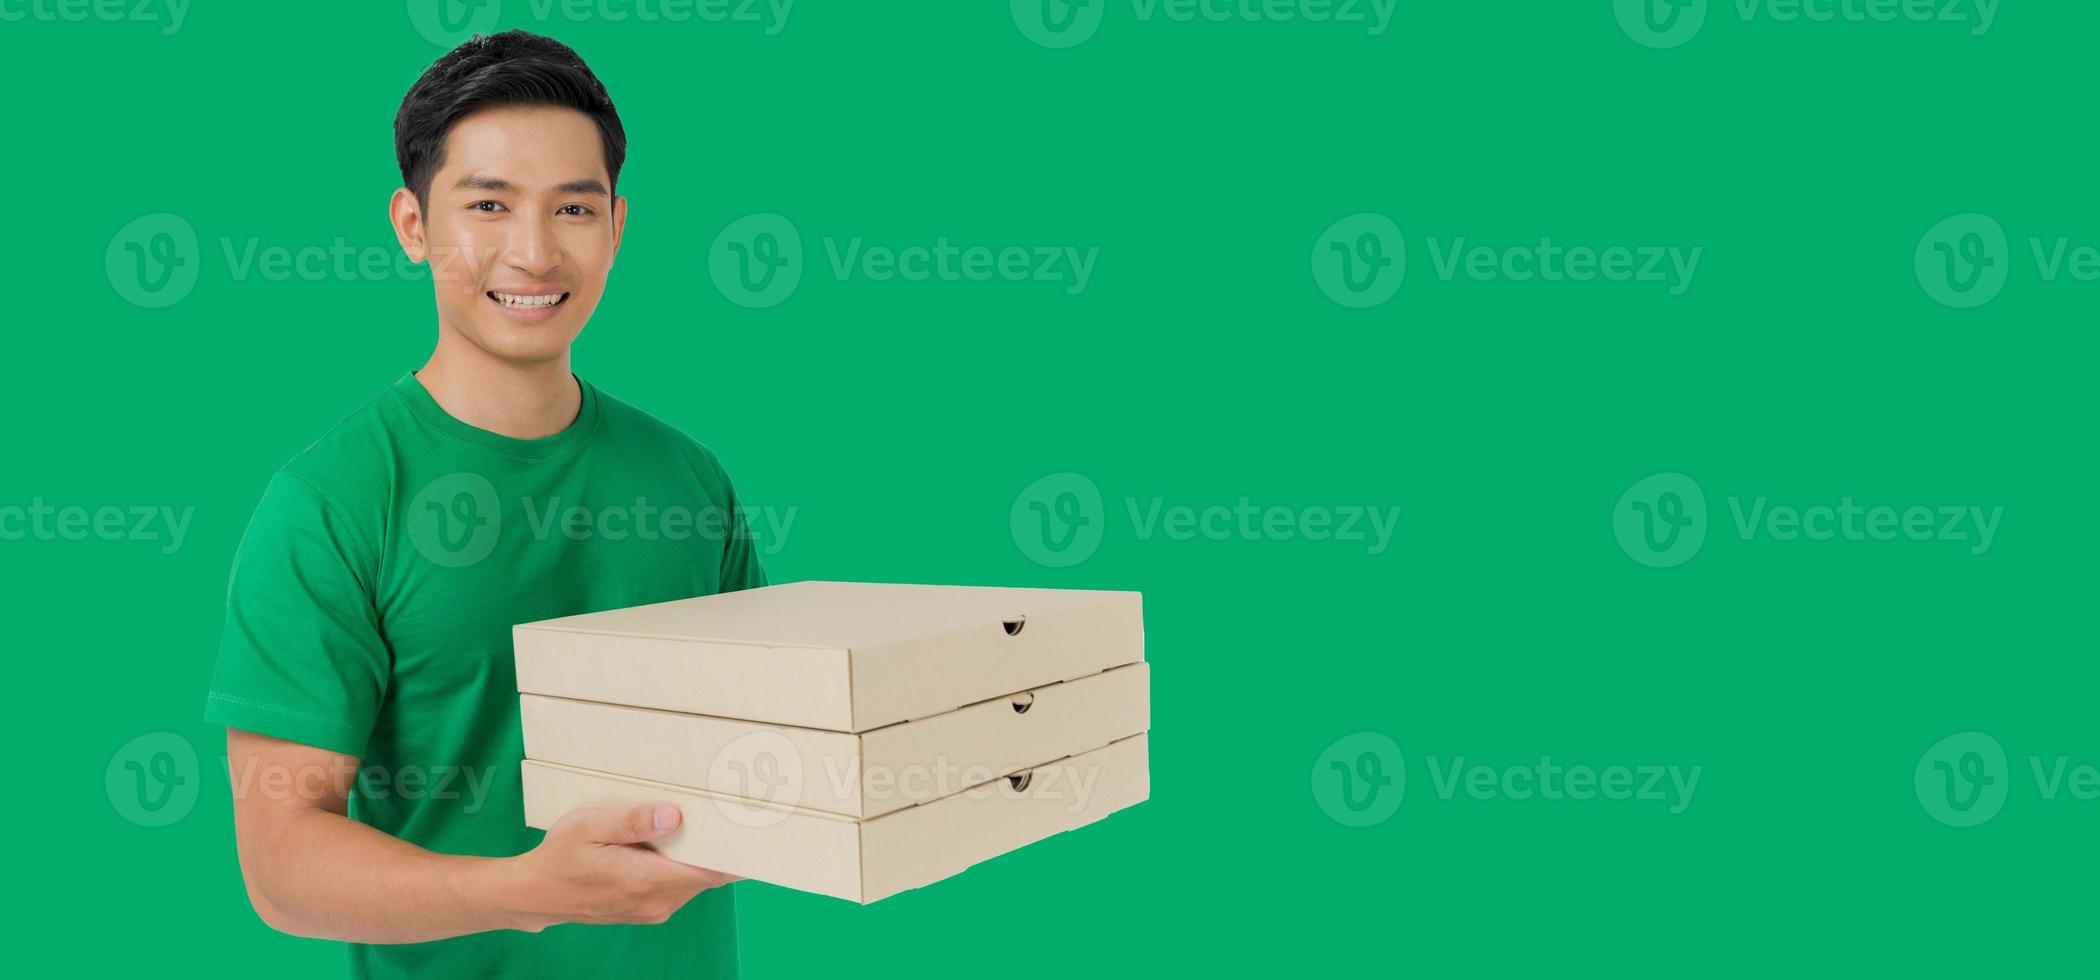 The smiling pizza delivery man stands on a green background holding the pizza box and wearing a green t-shirt uniform. photo